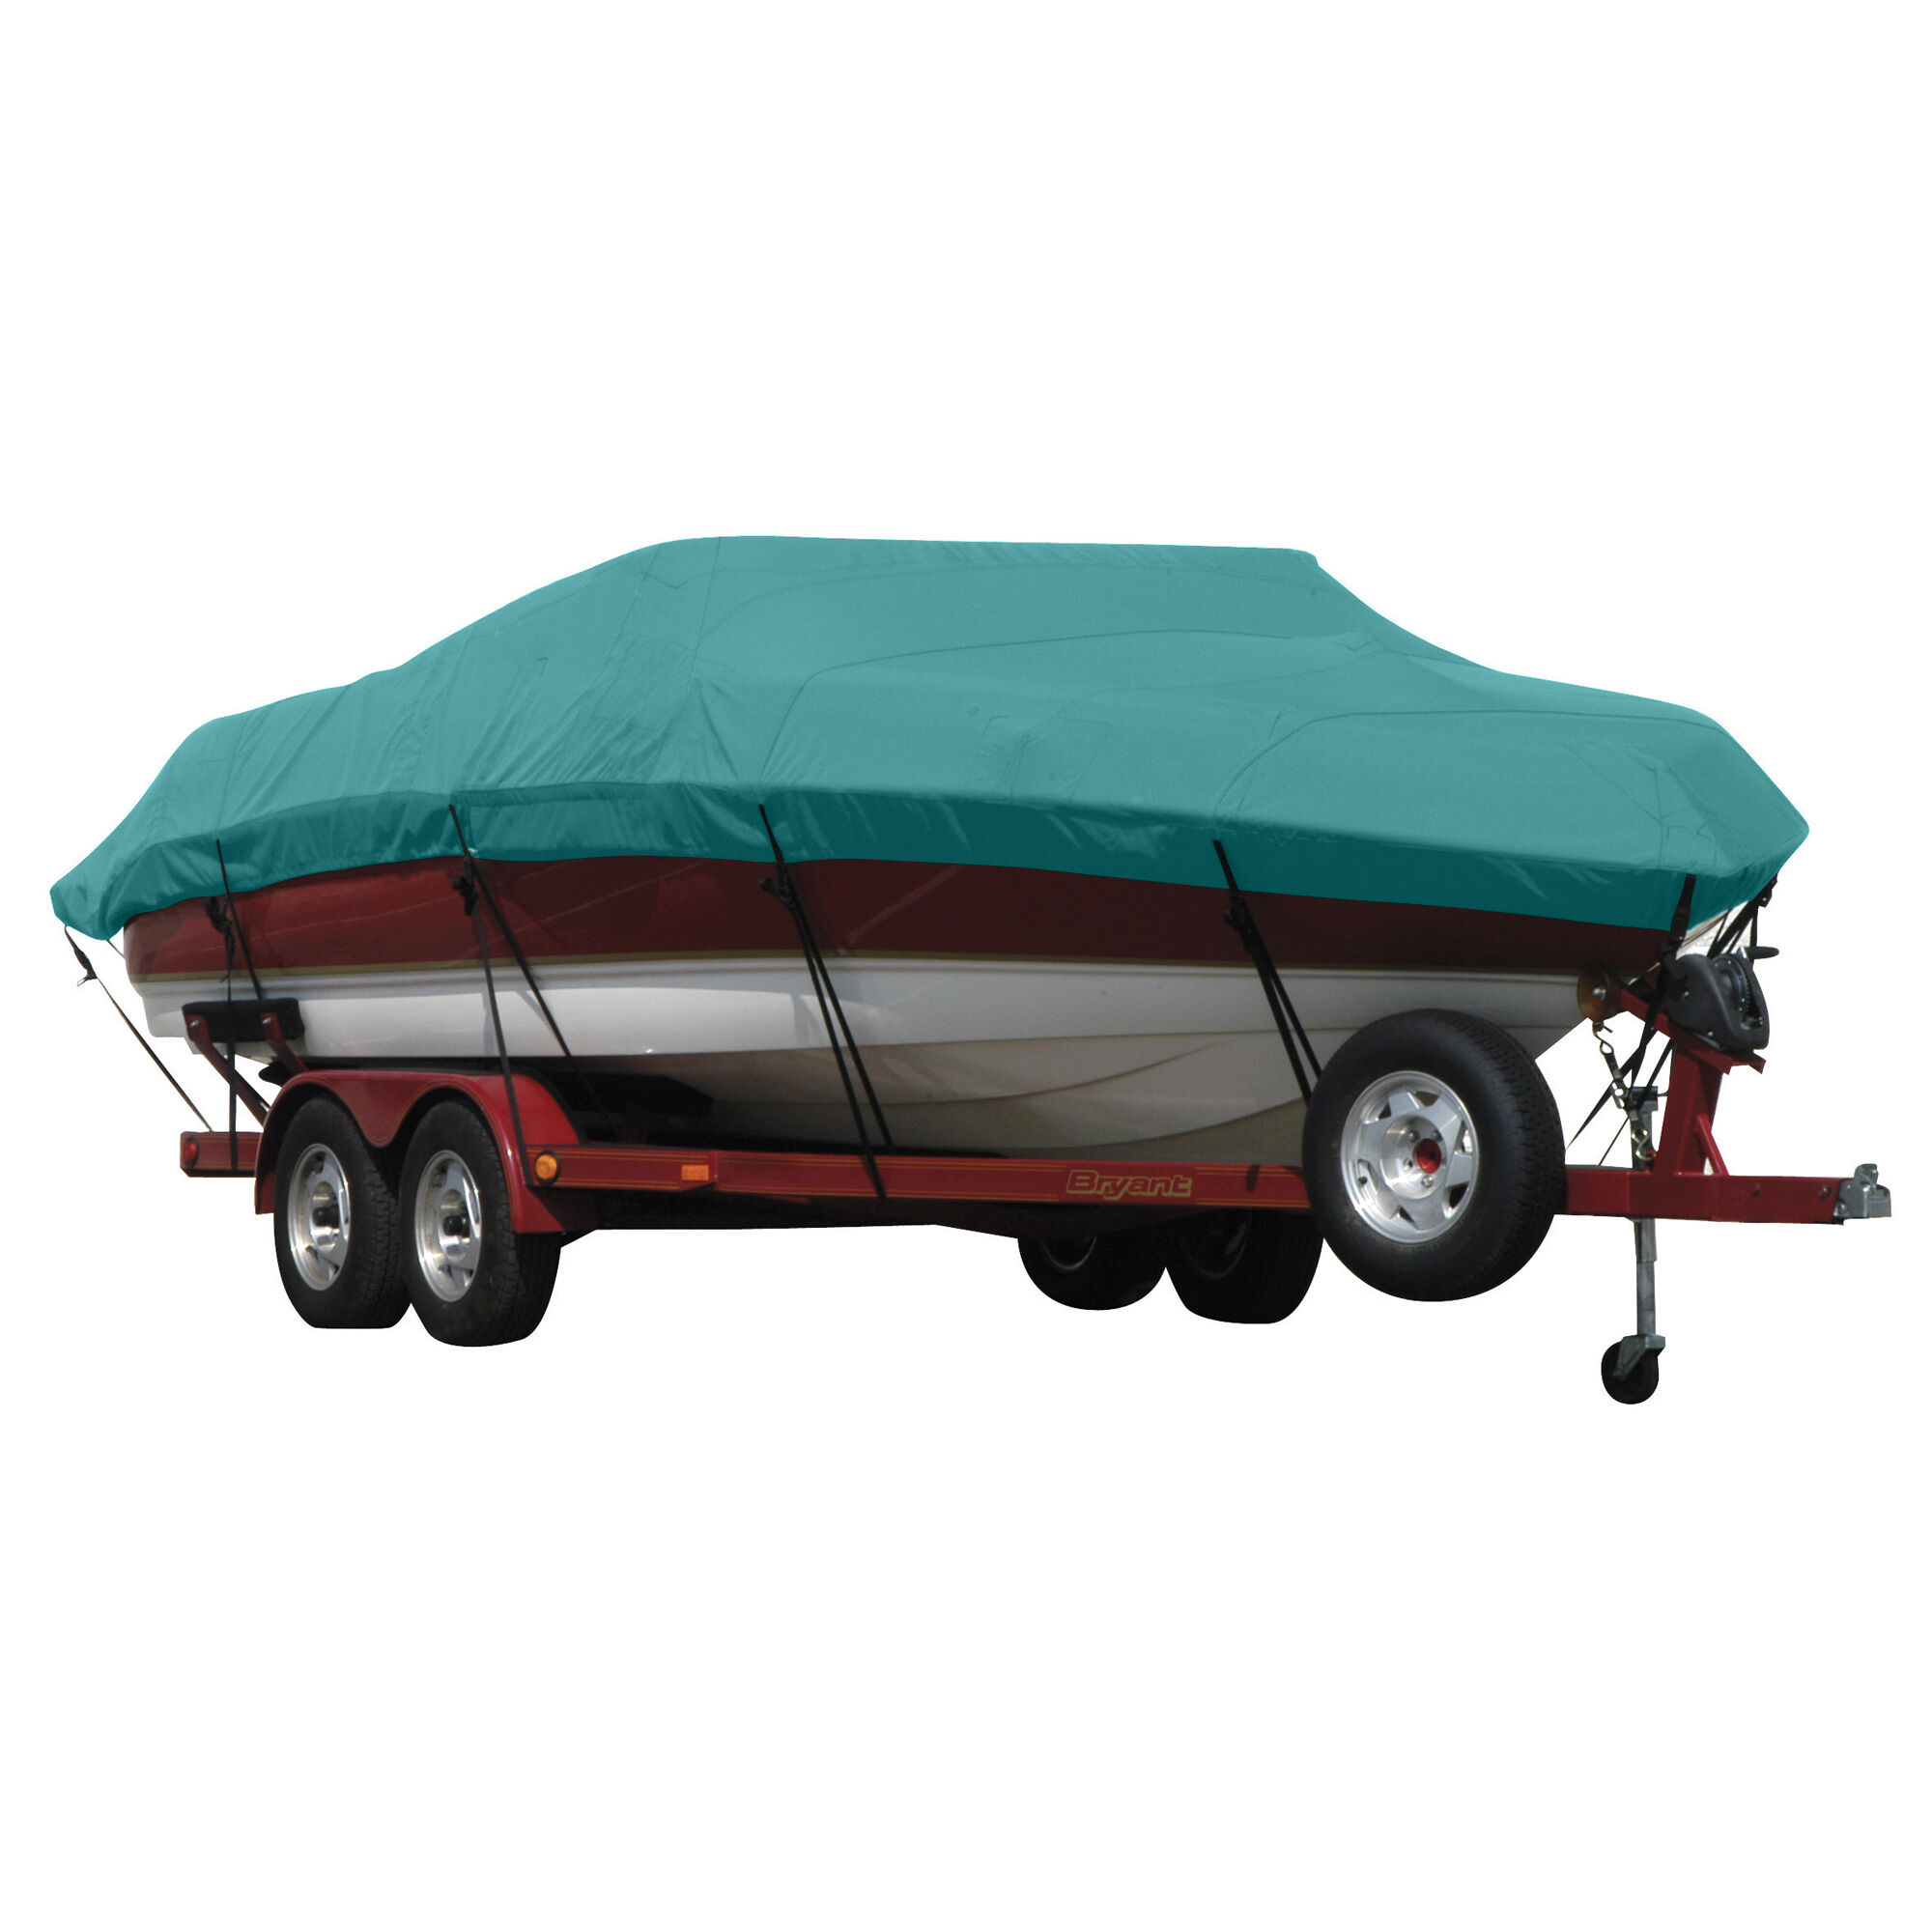 Covermate Sunbrella Boat Cover For Moomba Boomerang Cb (Does Not Cover PLATFORMm) in Aqua Blue